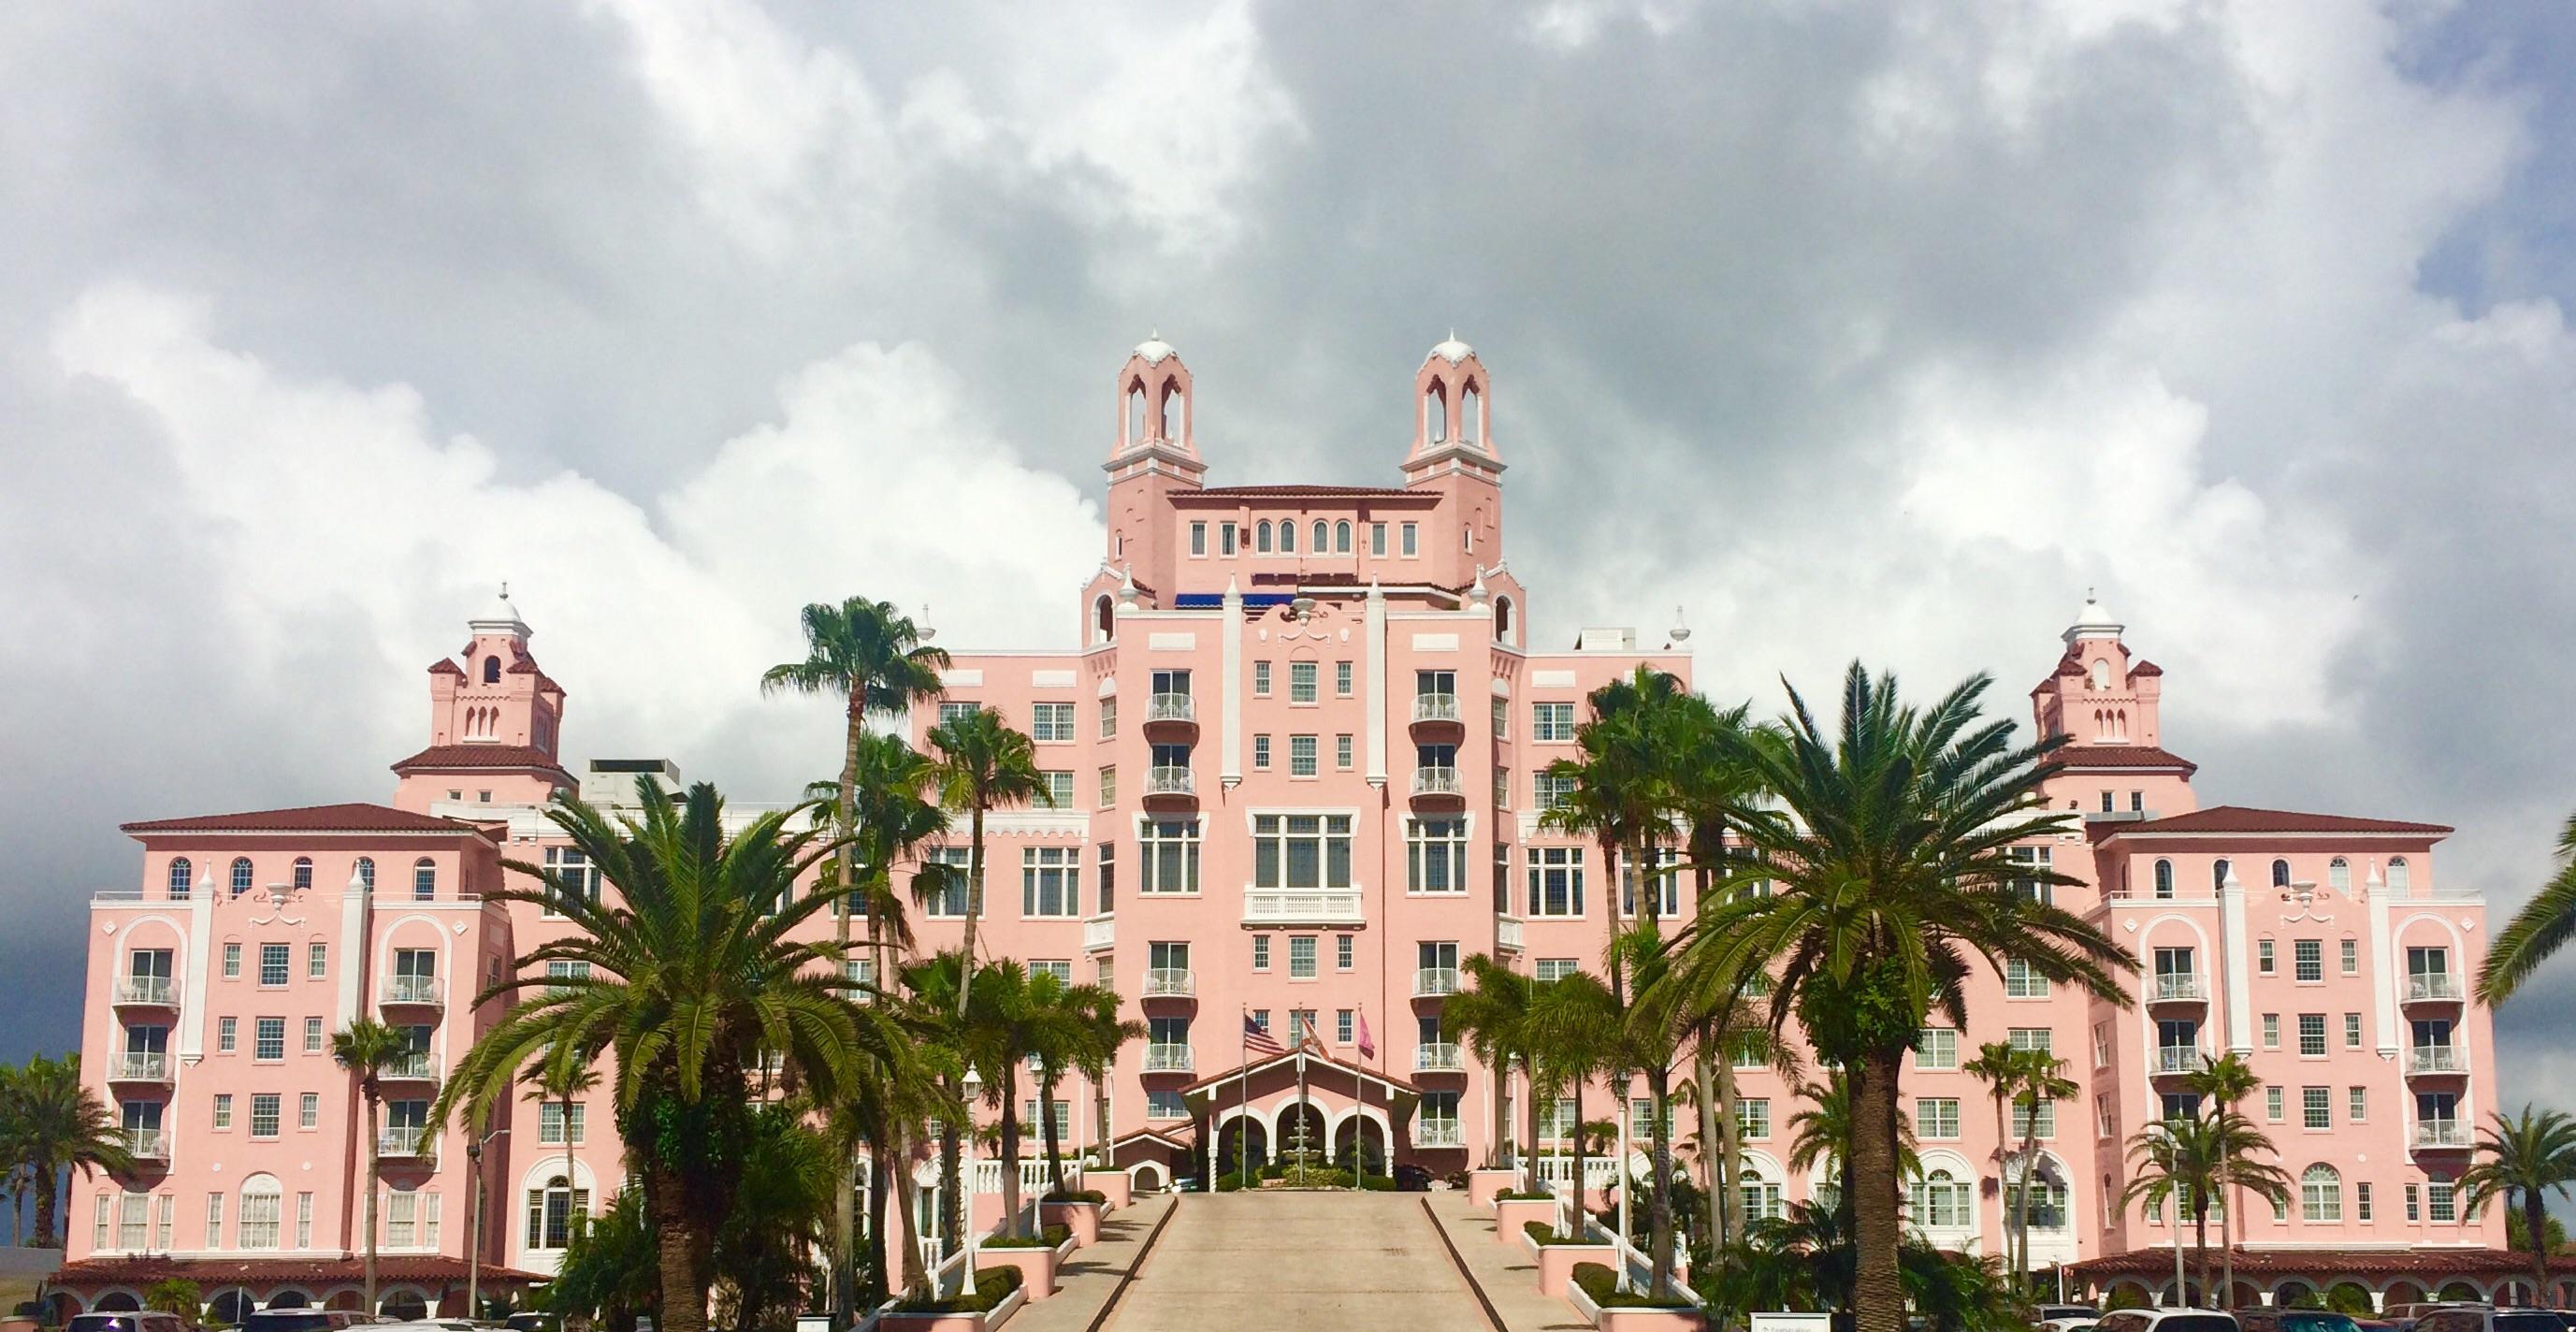 Don CeSar Hotel in St. Petersburg, FL aka the Pink Lady ...